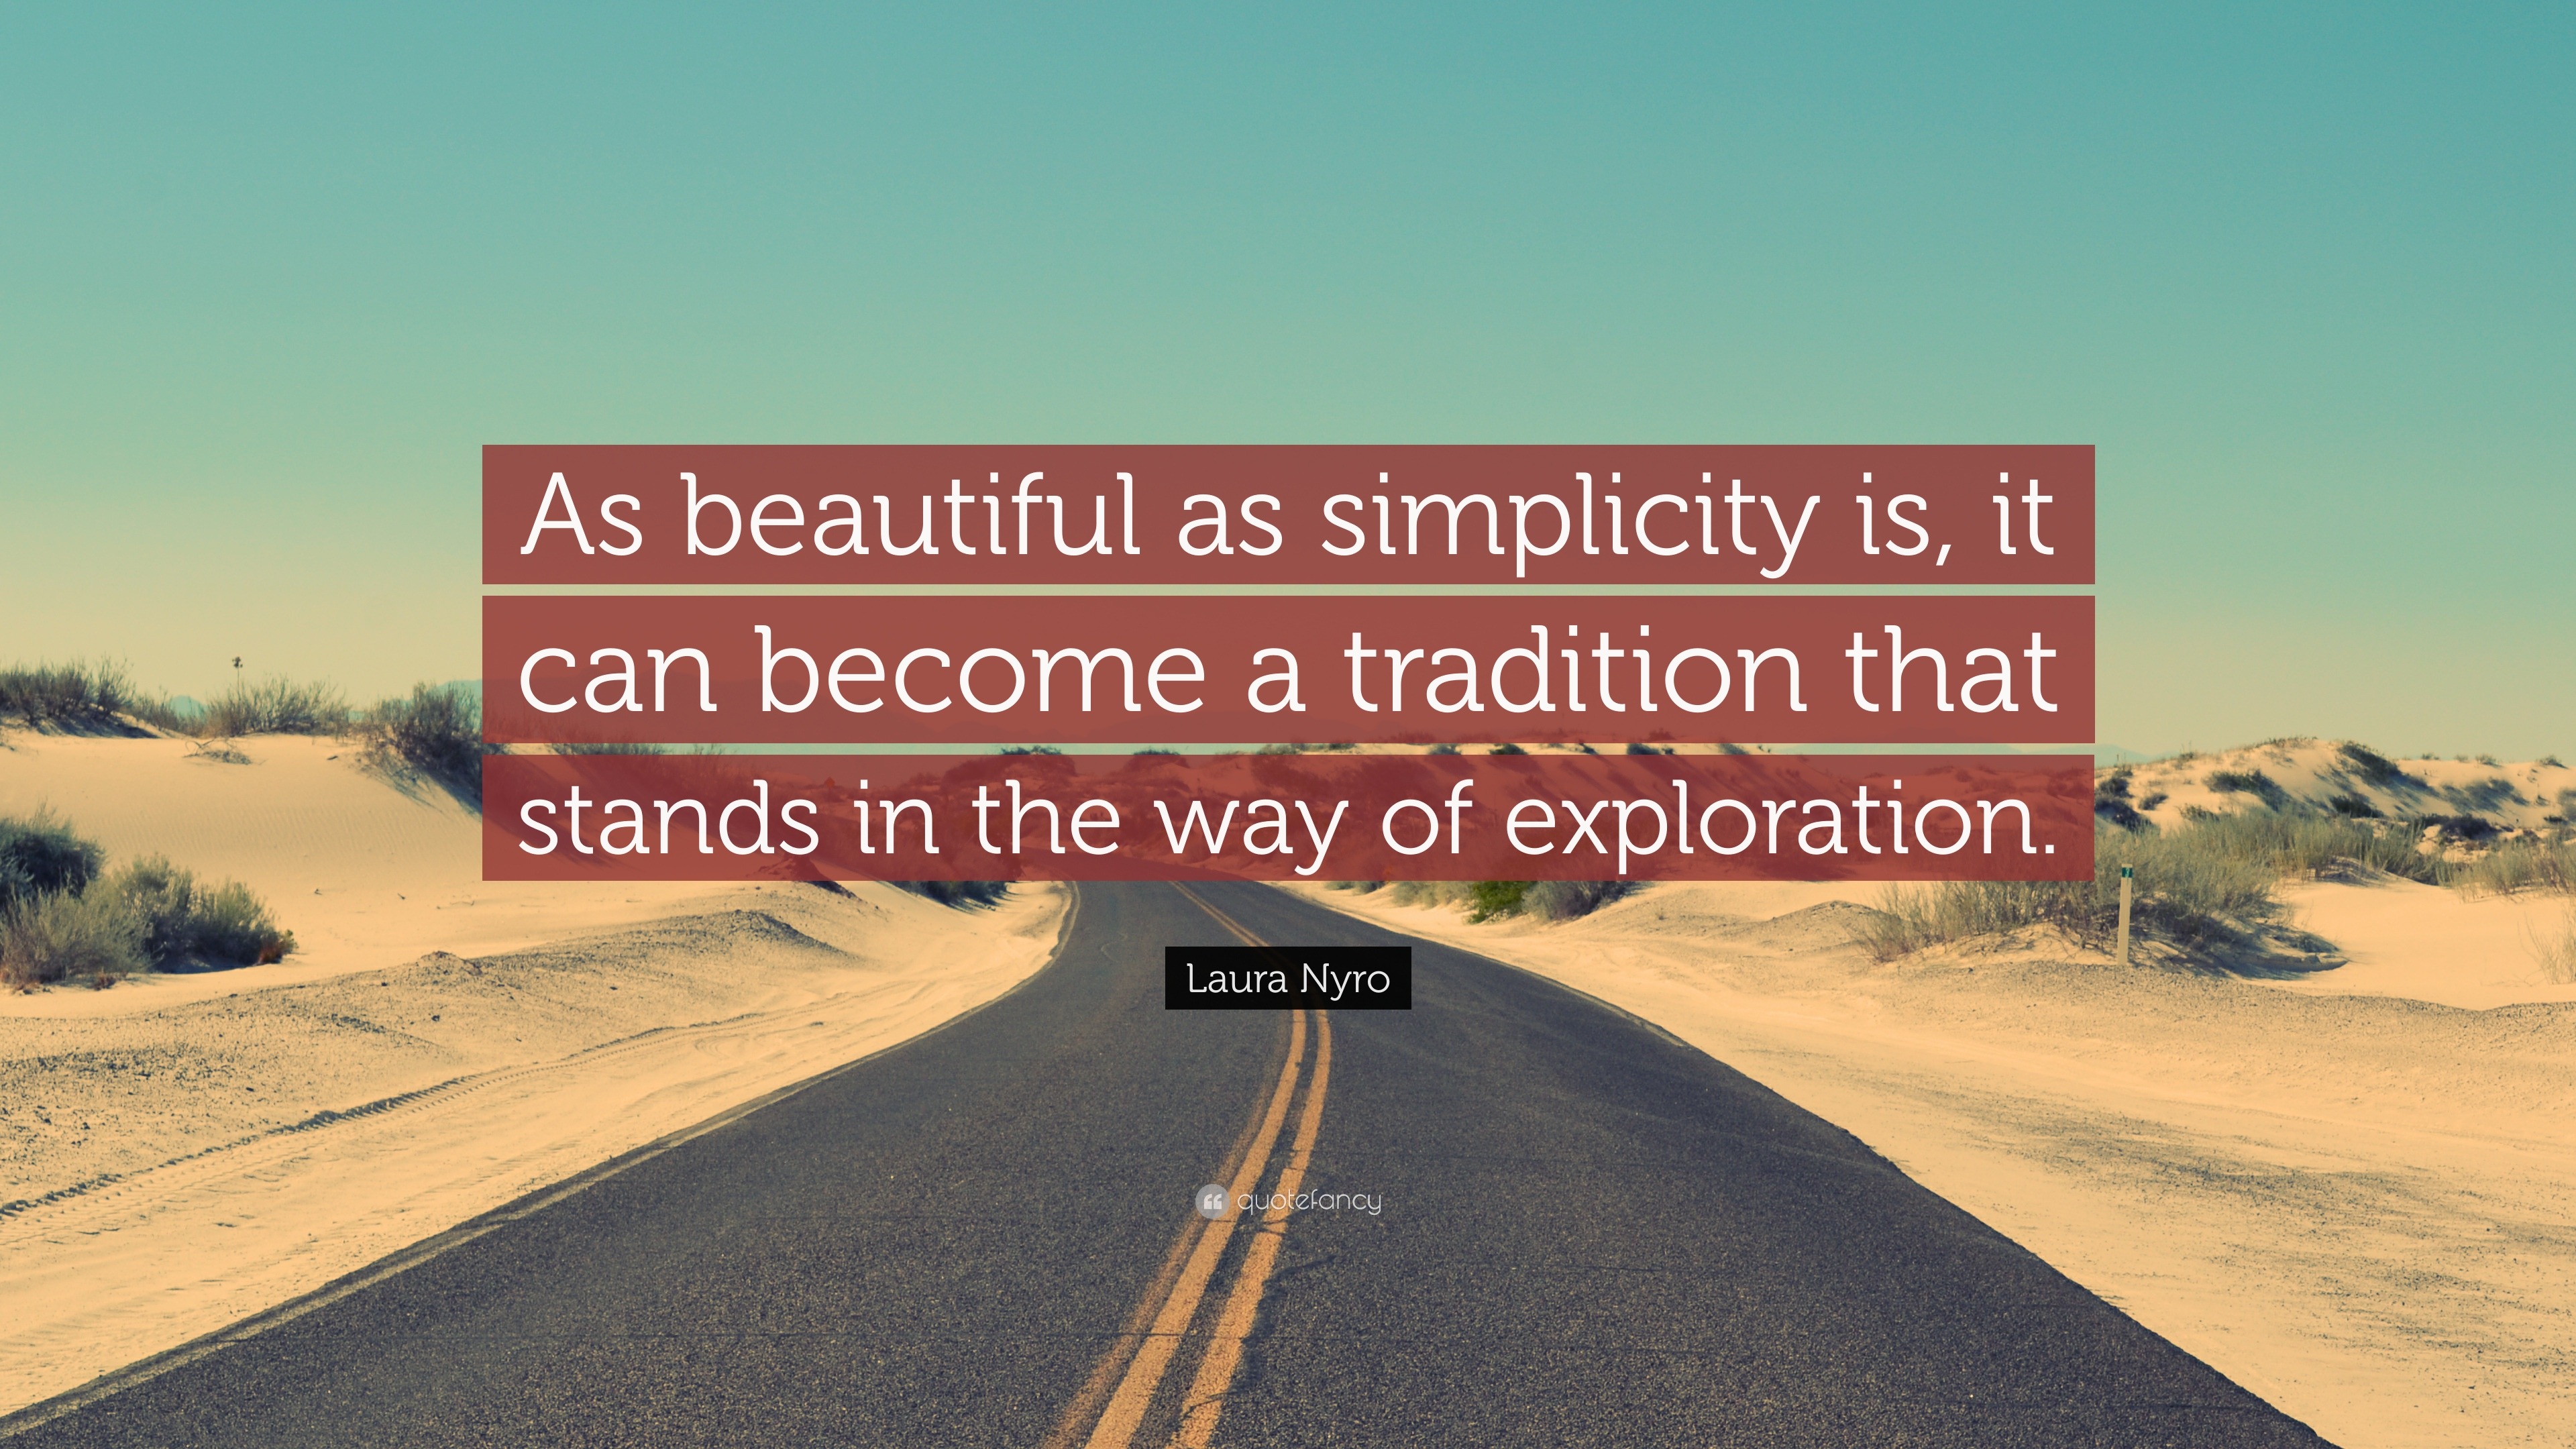 Laura Nyro Quote: “As beautiful as simplicity is, it can ...